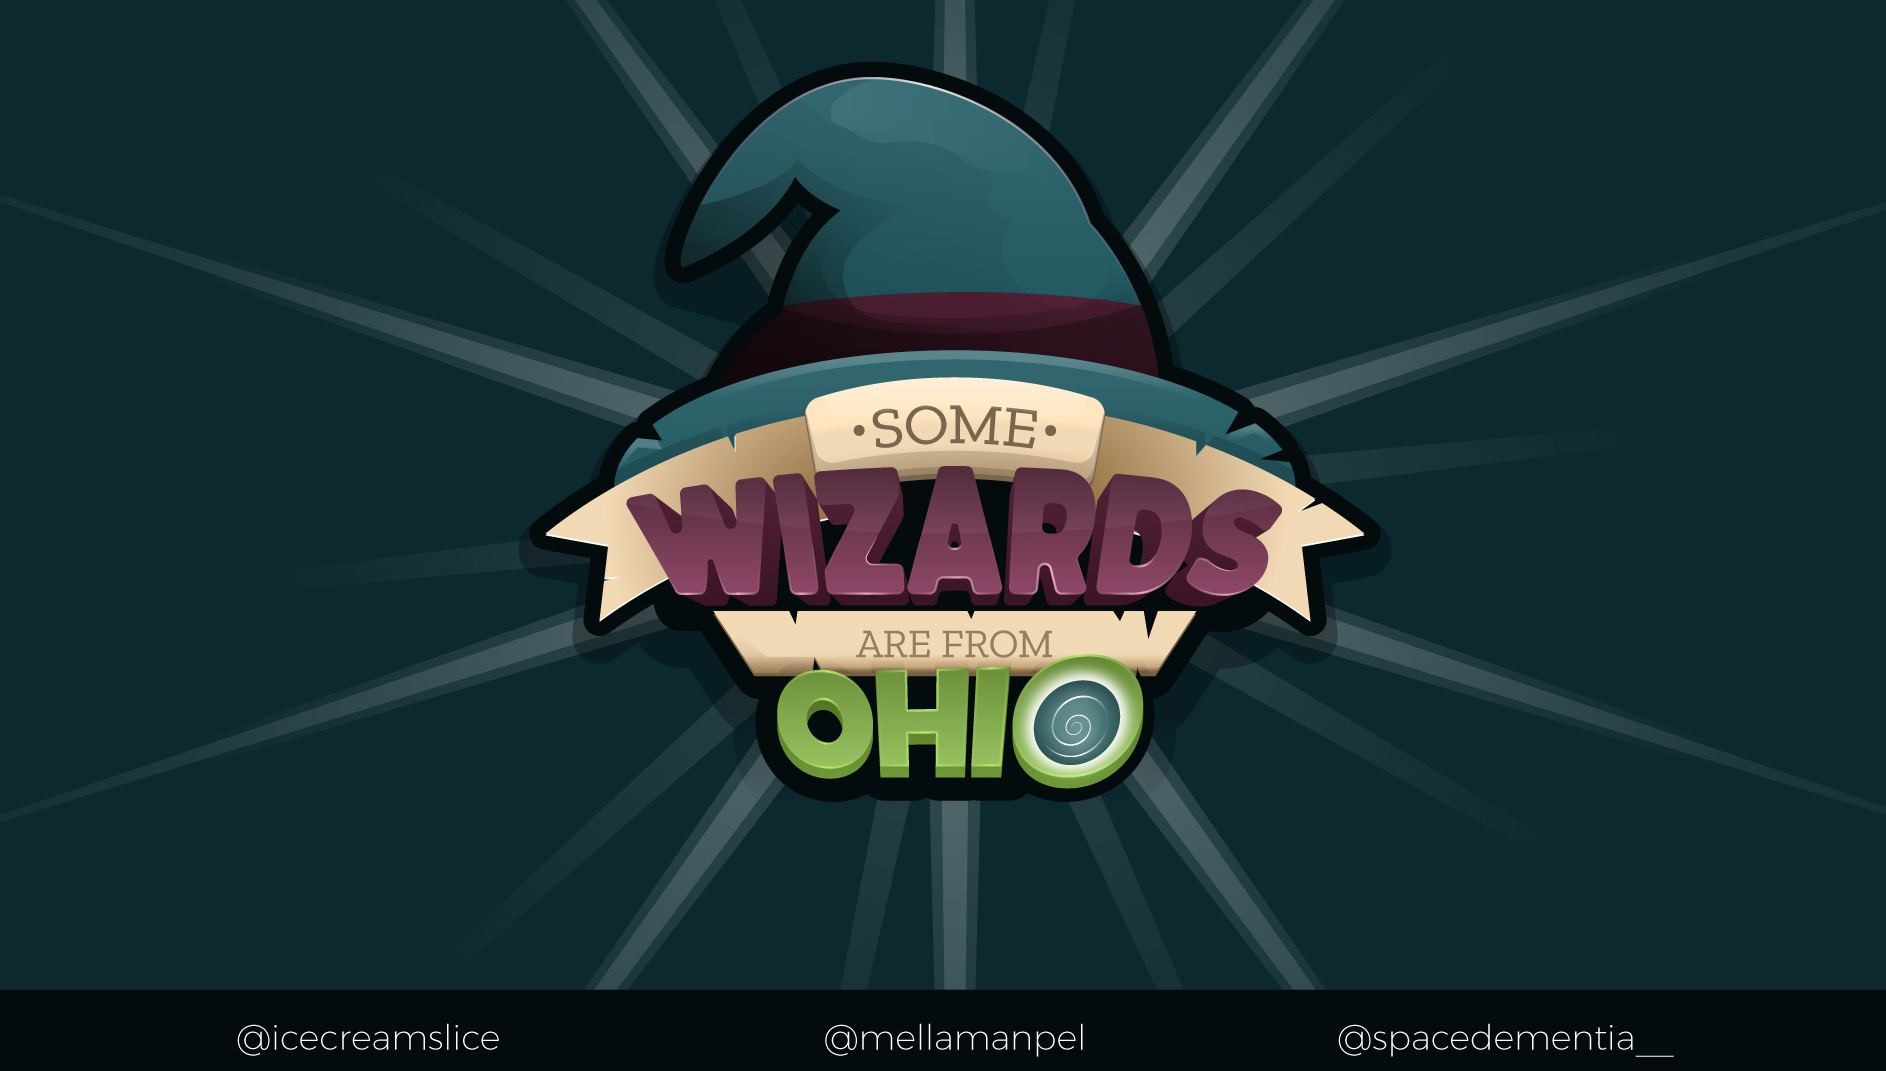 Some Wizards Are From Ohio